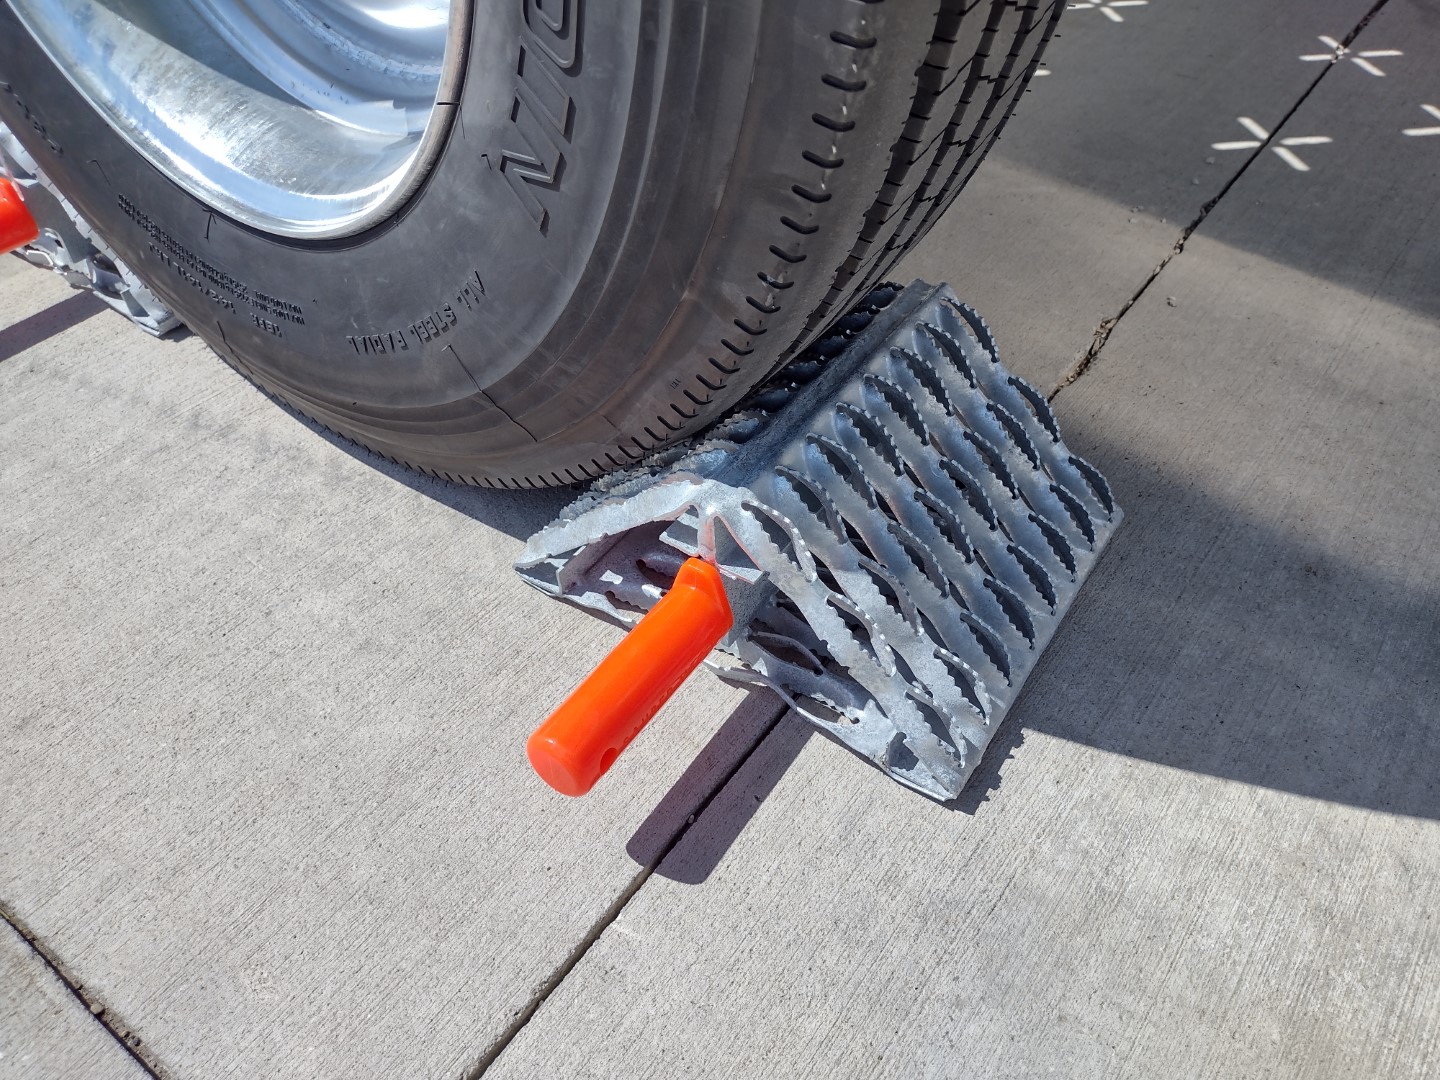 One All-Weather Wheel Chock with steel grip strut surfaces in position on the ground against a tire. Only the wheel and the wheel chock are visible. The All-Weather Wheel Chock has a natural galvanized finish and includes an orange urethane grip handle.